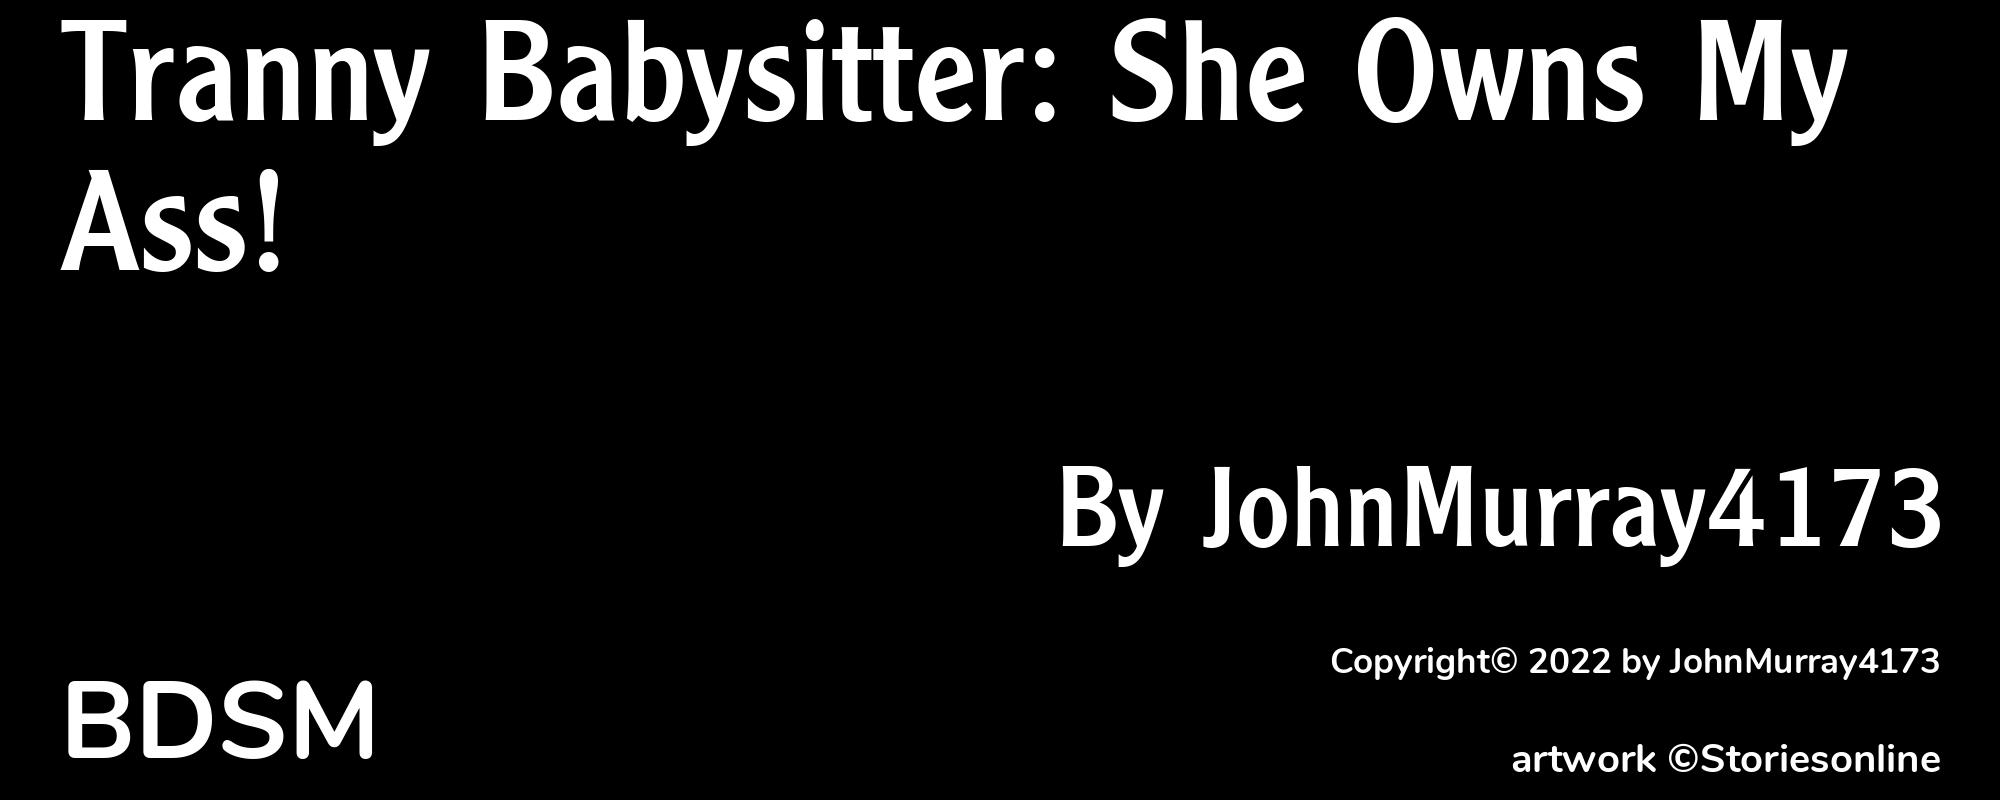 Tranny Babysitter: She Owns My Ass! - Cover